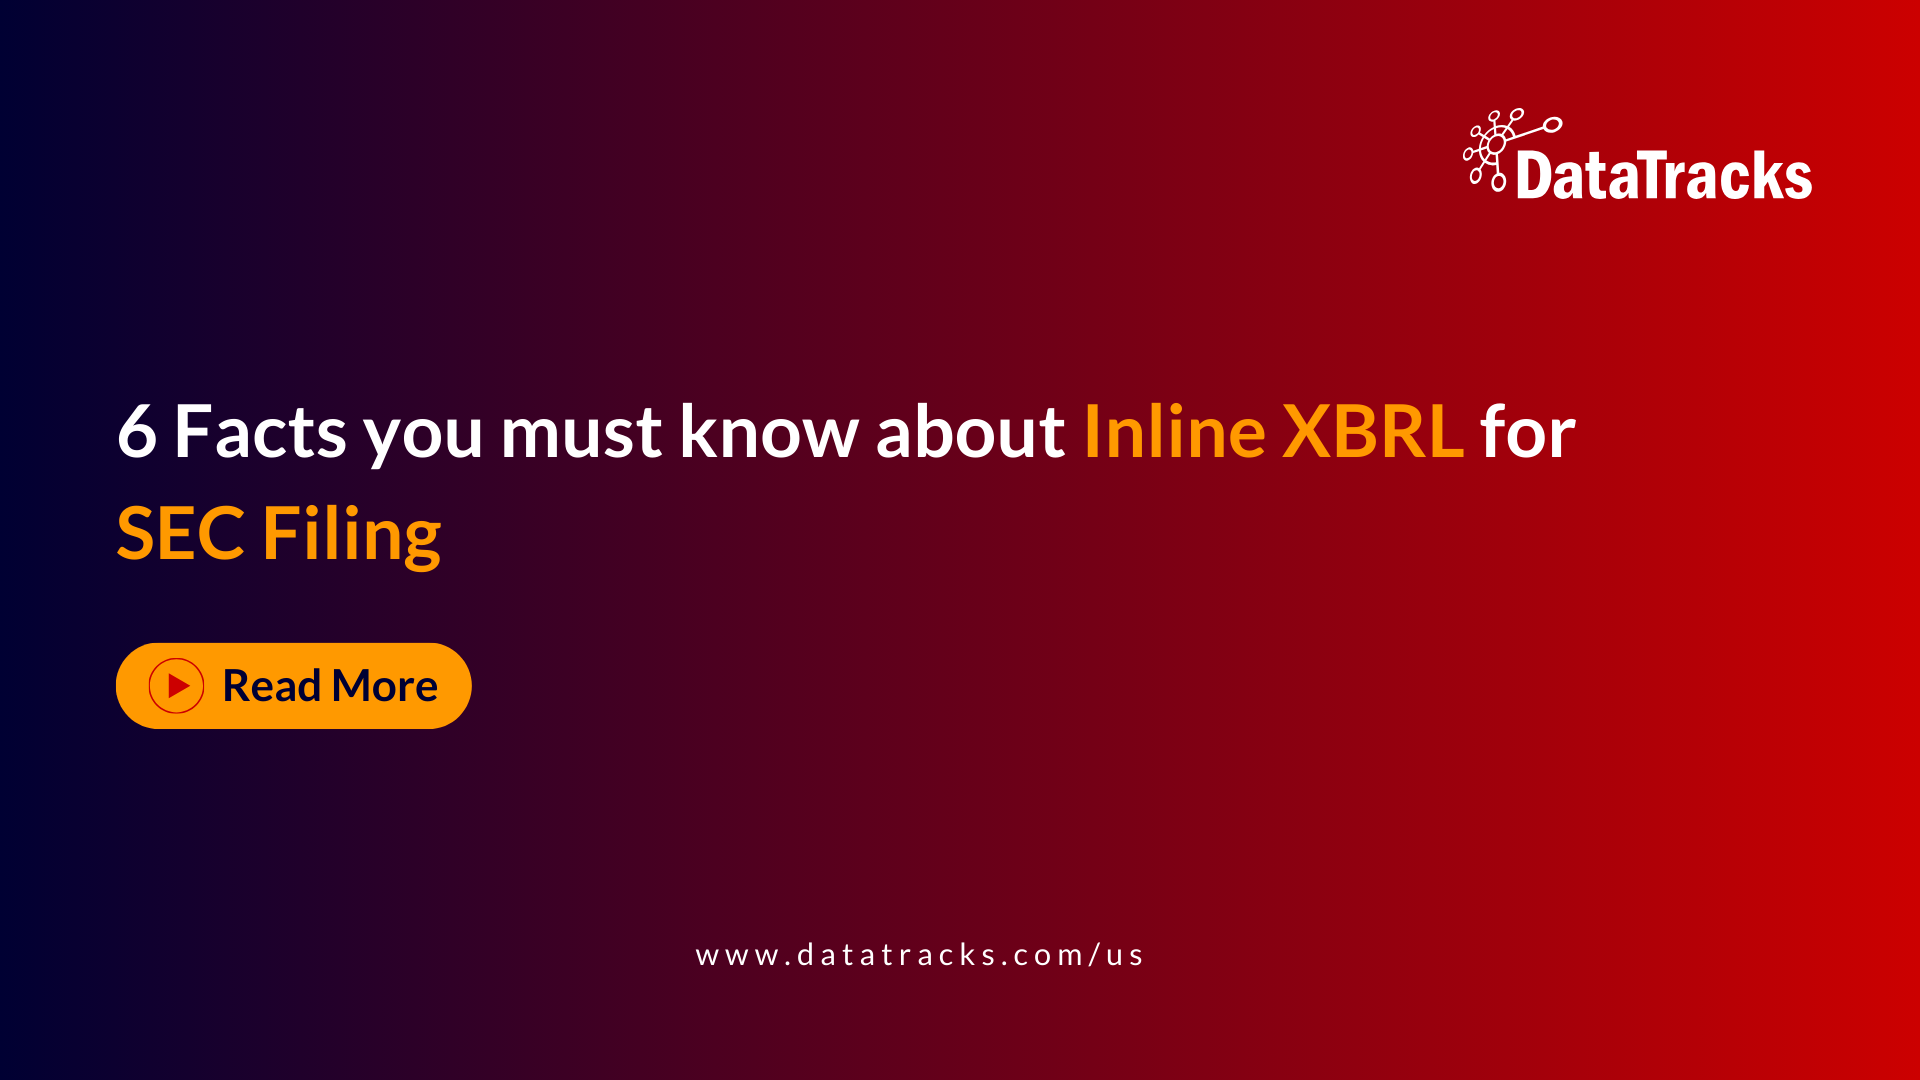 6 facts you must know about Inline XBRL for SEC Filing